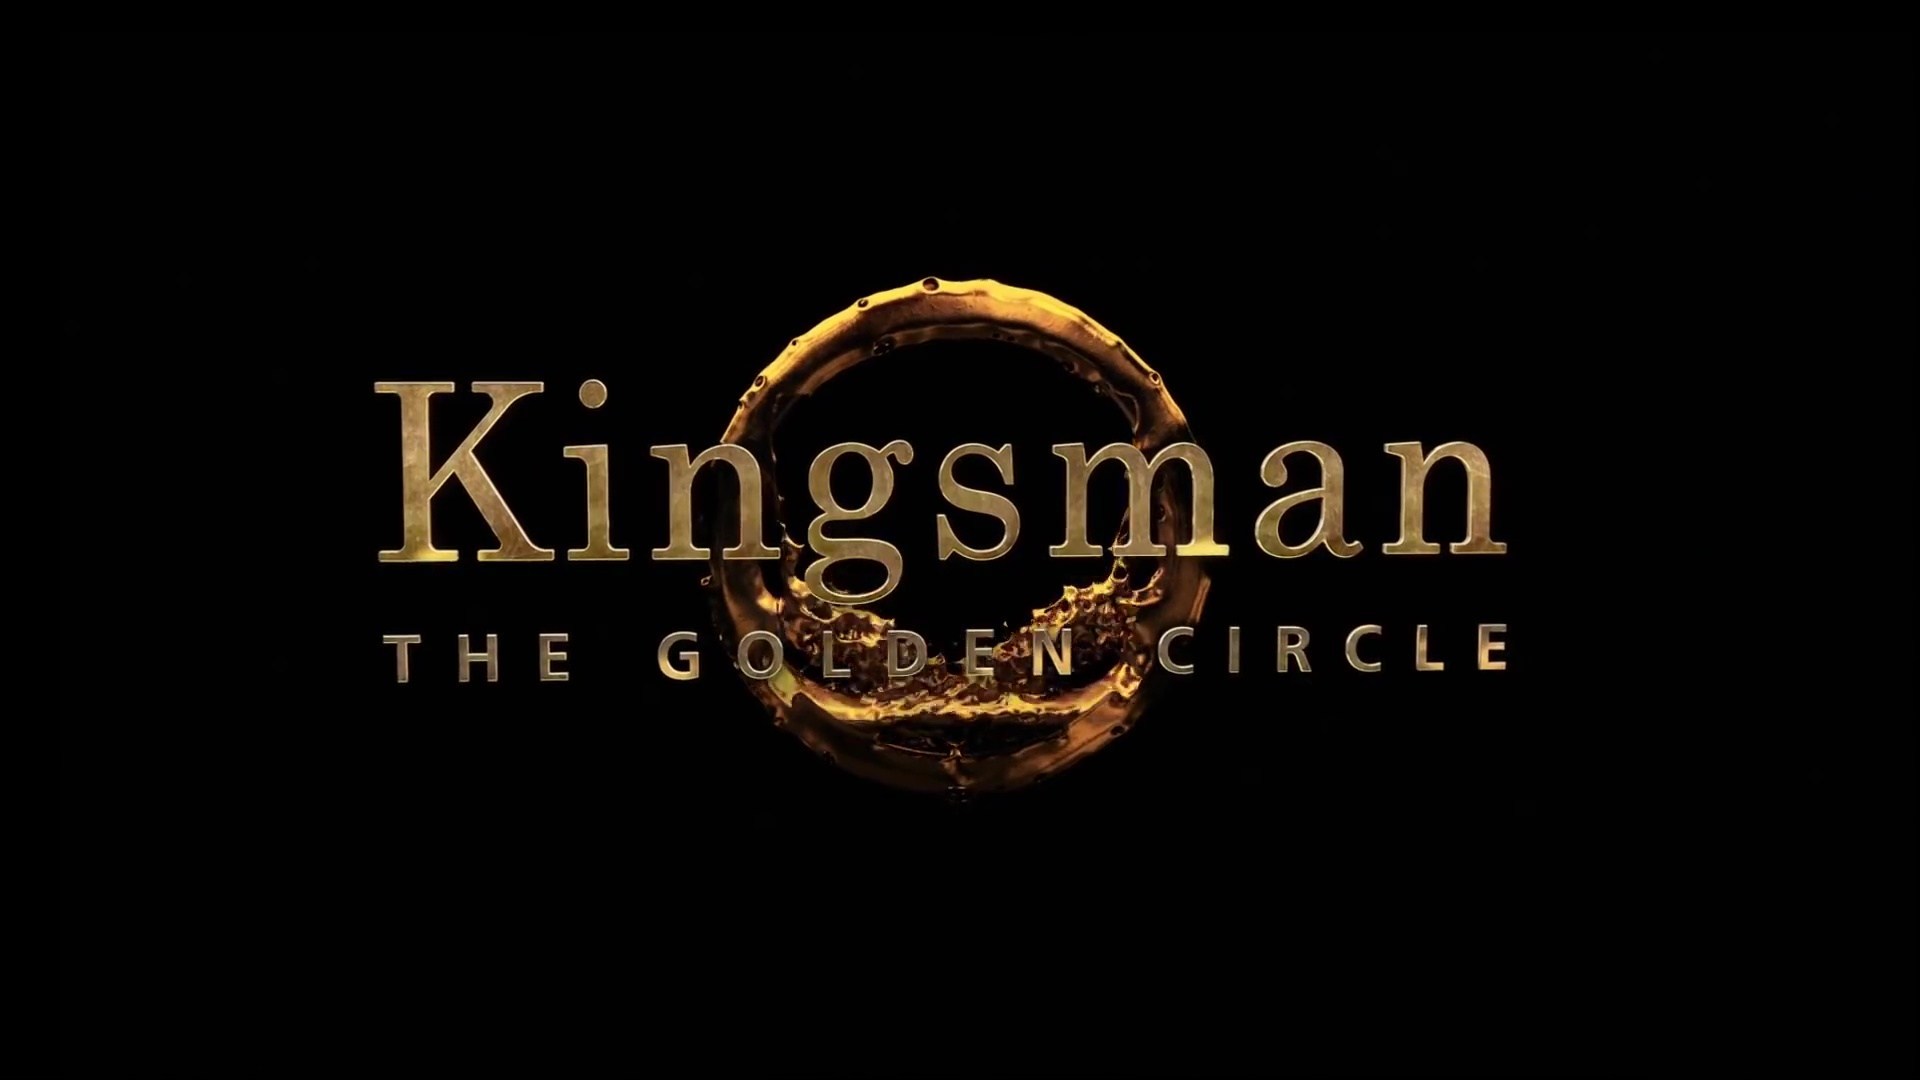 Kingsman Wallpaper Posted By Zoey Simpson